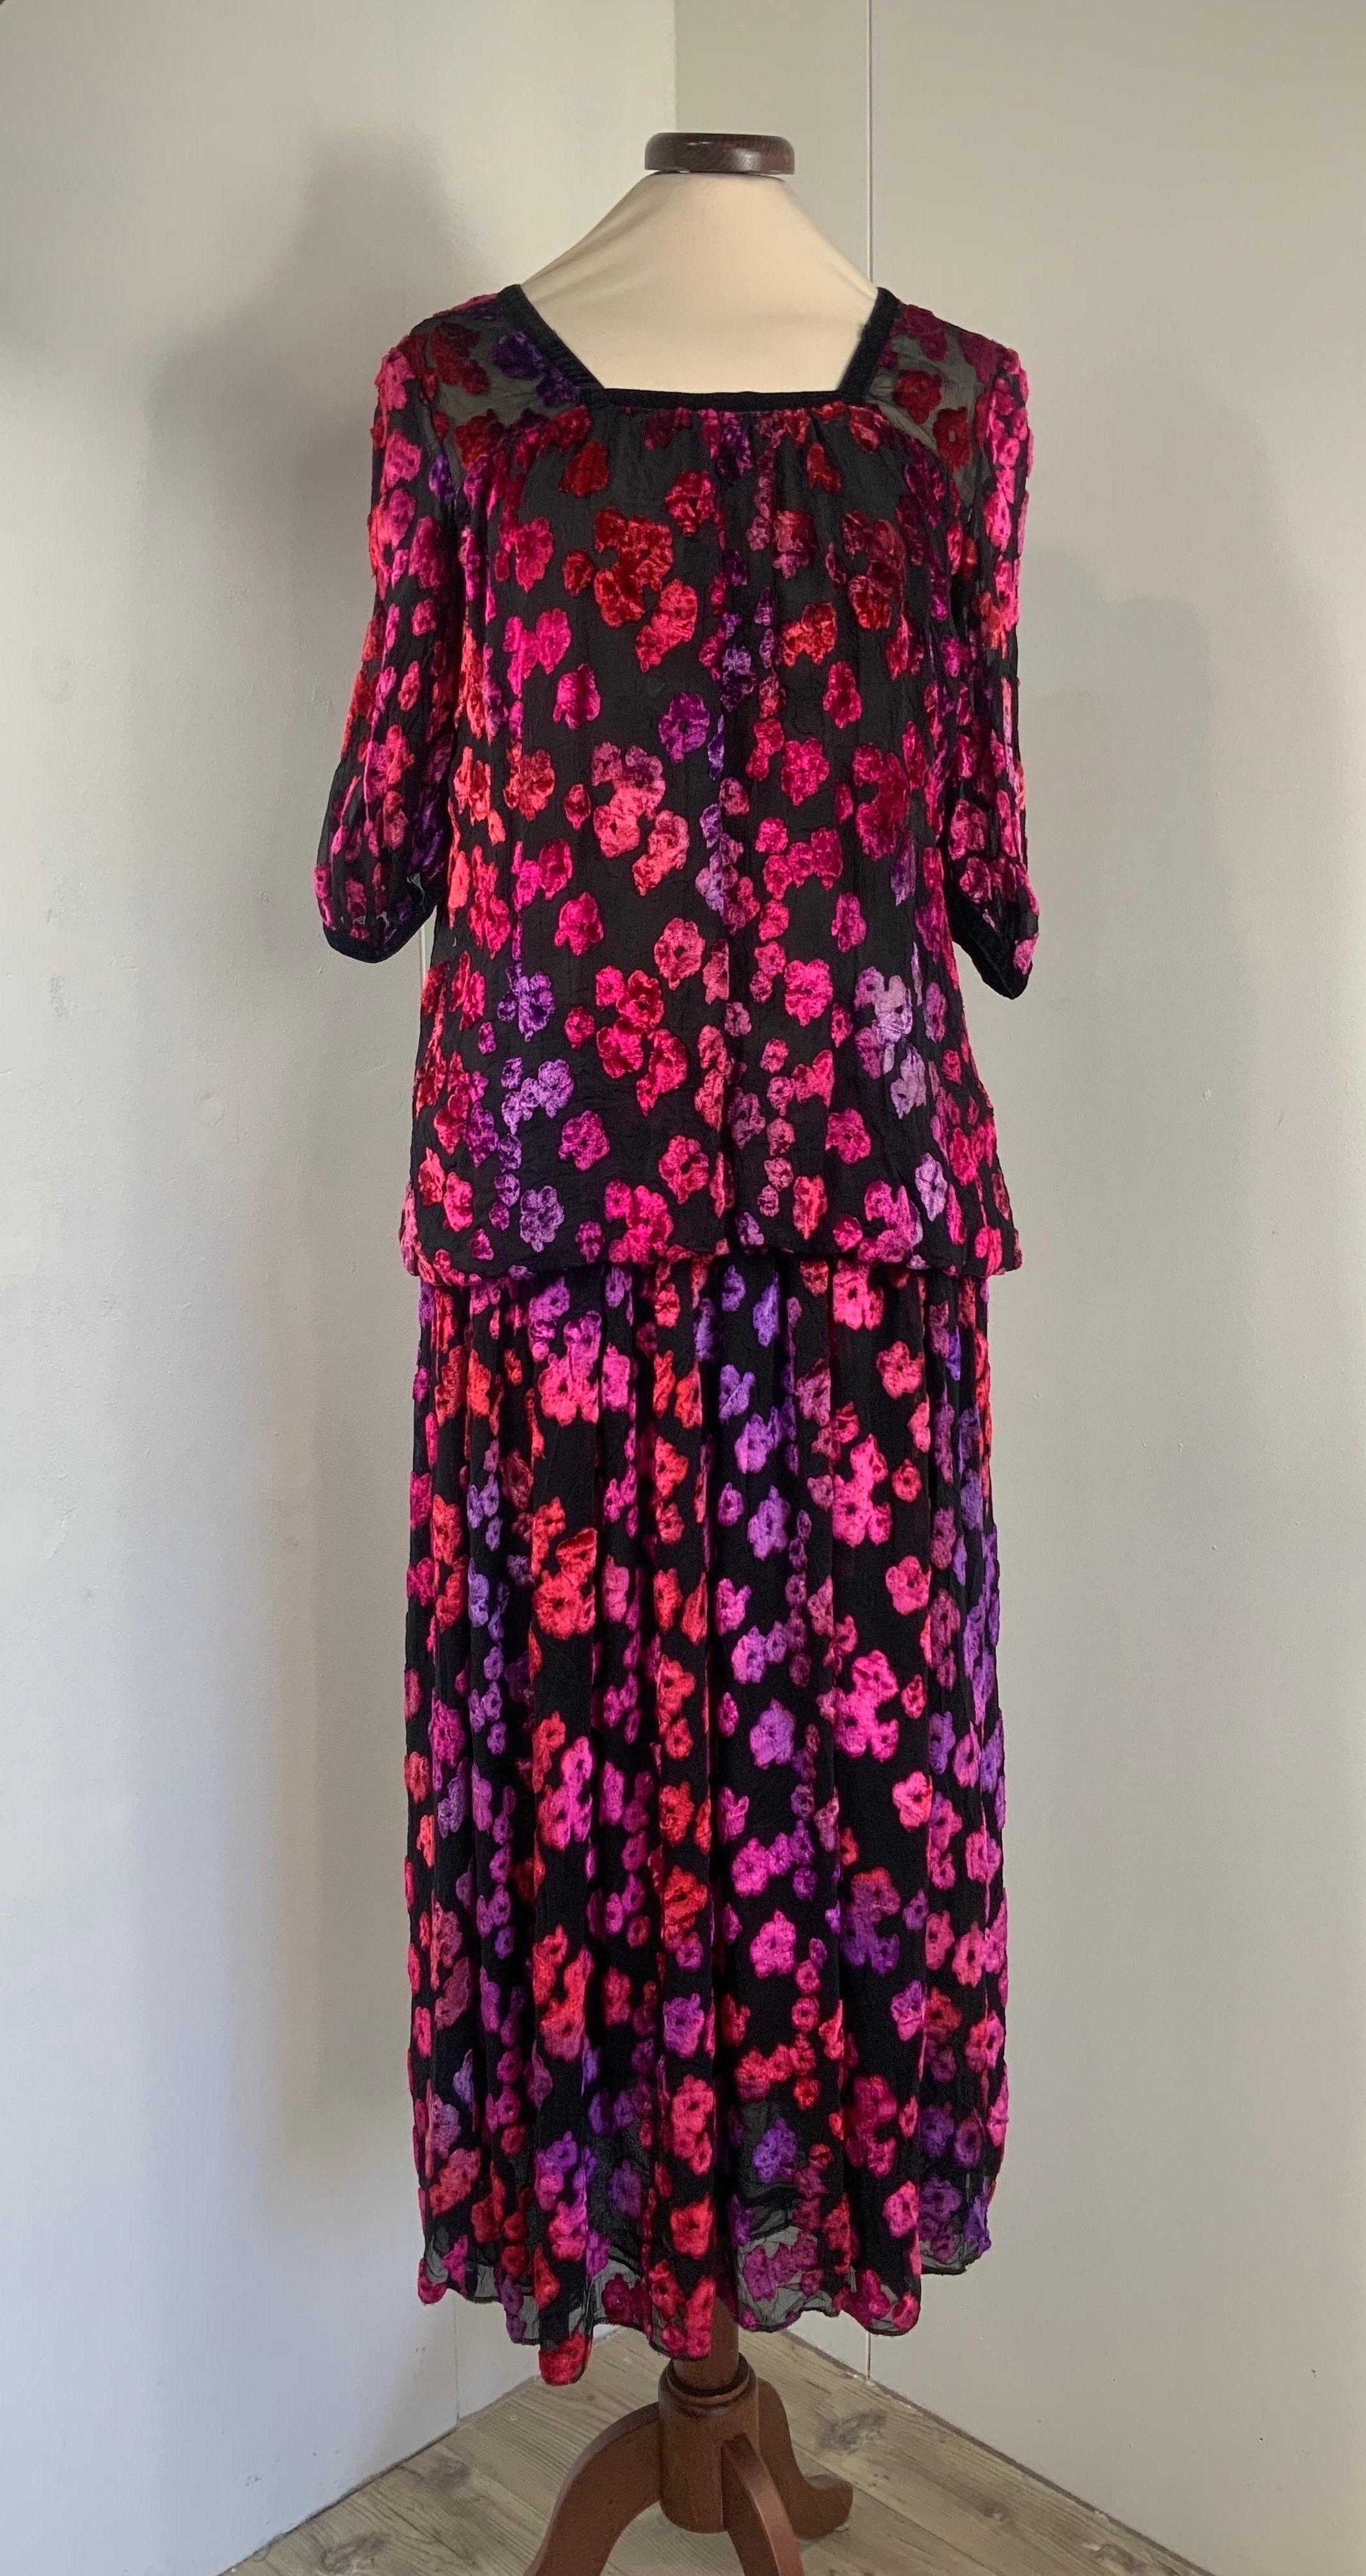 COURREGES Dress.
Vintage clothe.
Featuring silk and viscose.
Fabrics and colors are really amazing.
Size is missing. It fits an 40/42 Italian.
Shoulders 40 cm
Bust 44 cm
Length 125 cm
Conditions: Good - it shows normal use signs and pulled threads.